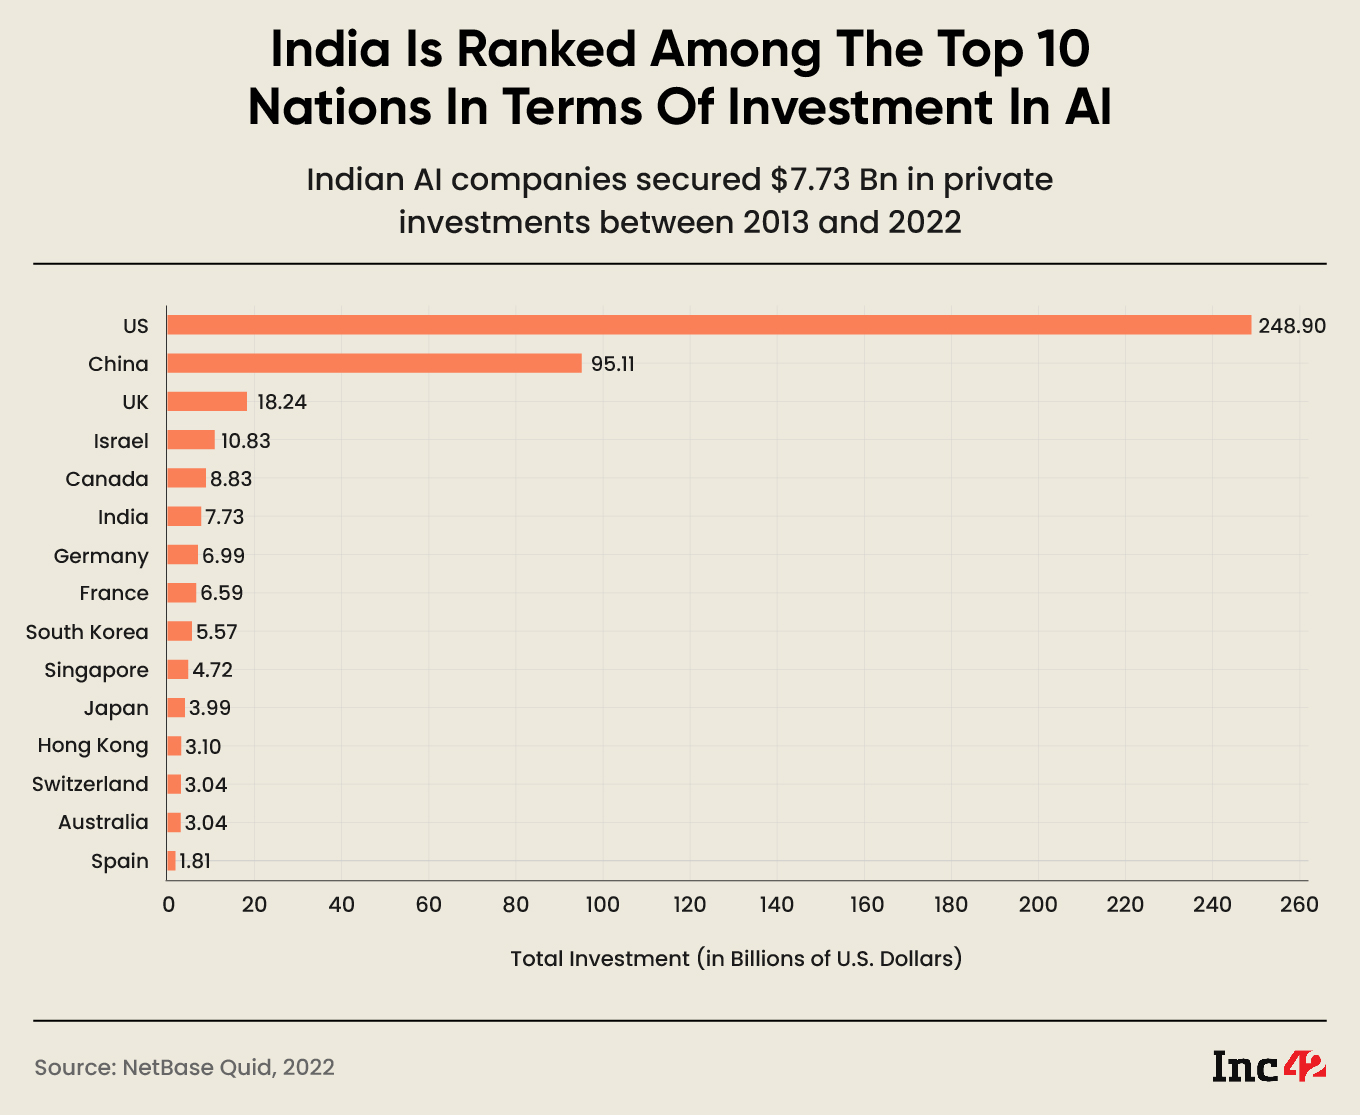 India is ranked among the top 10 nations in terms of investment in AI